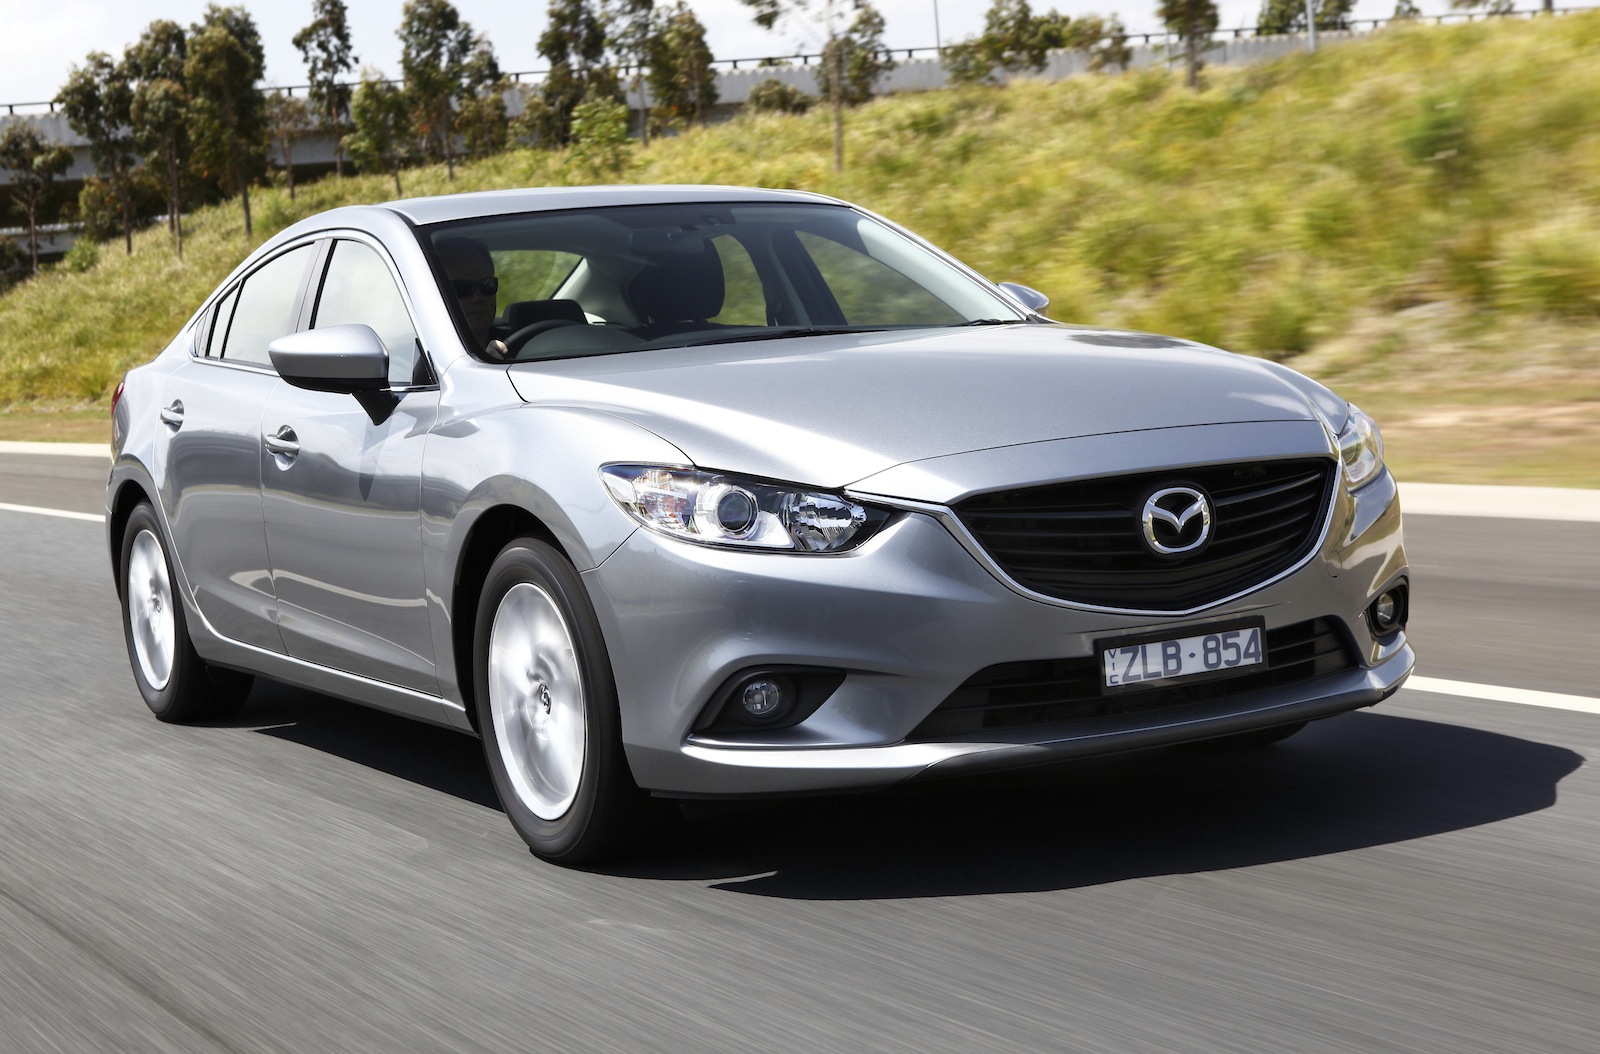 2013 Mazda6 pricing and specifications Photos (1 of 4)